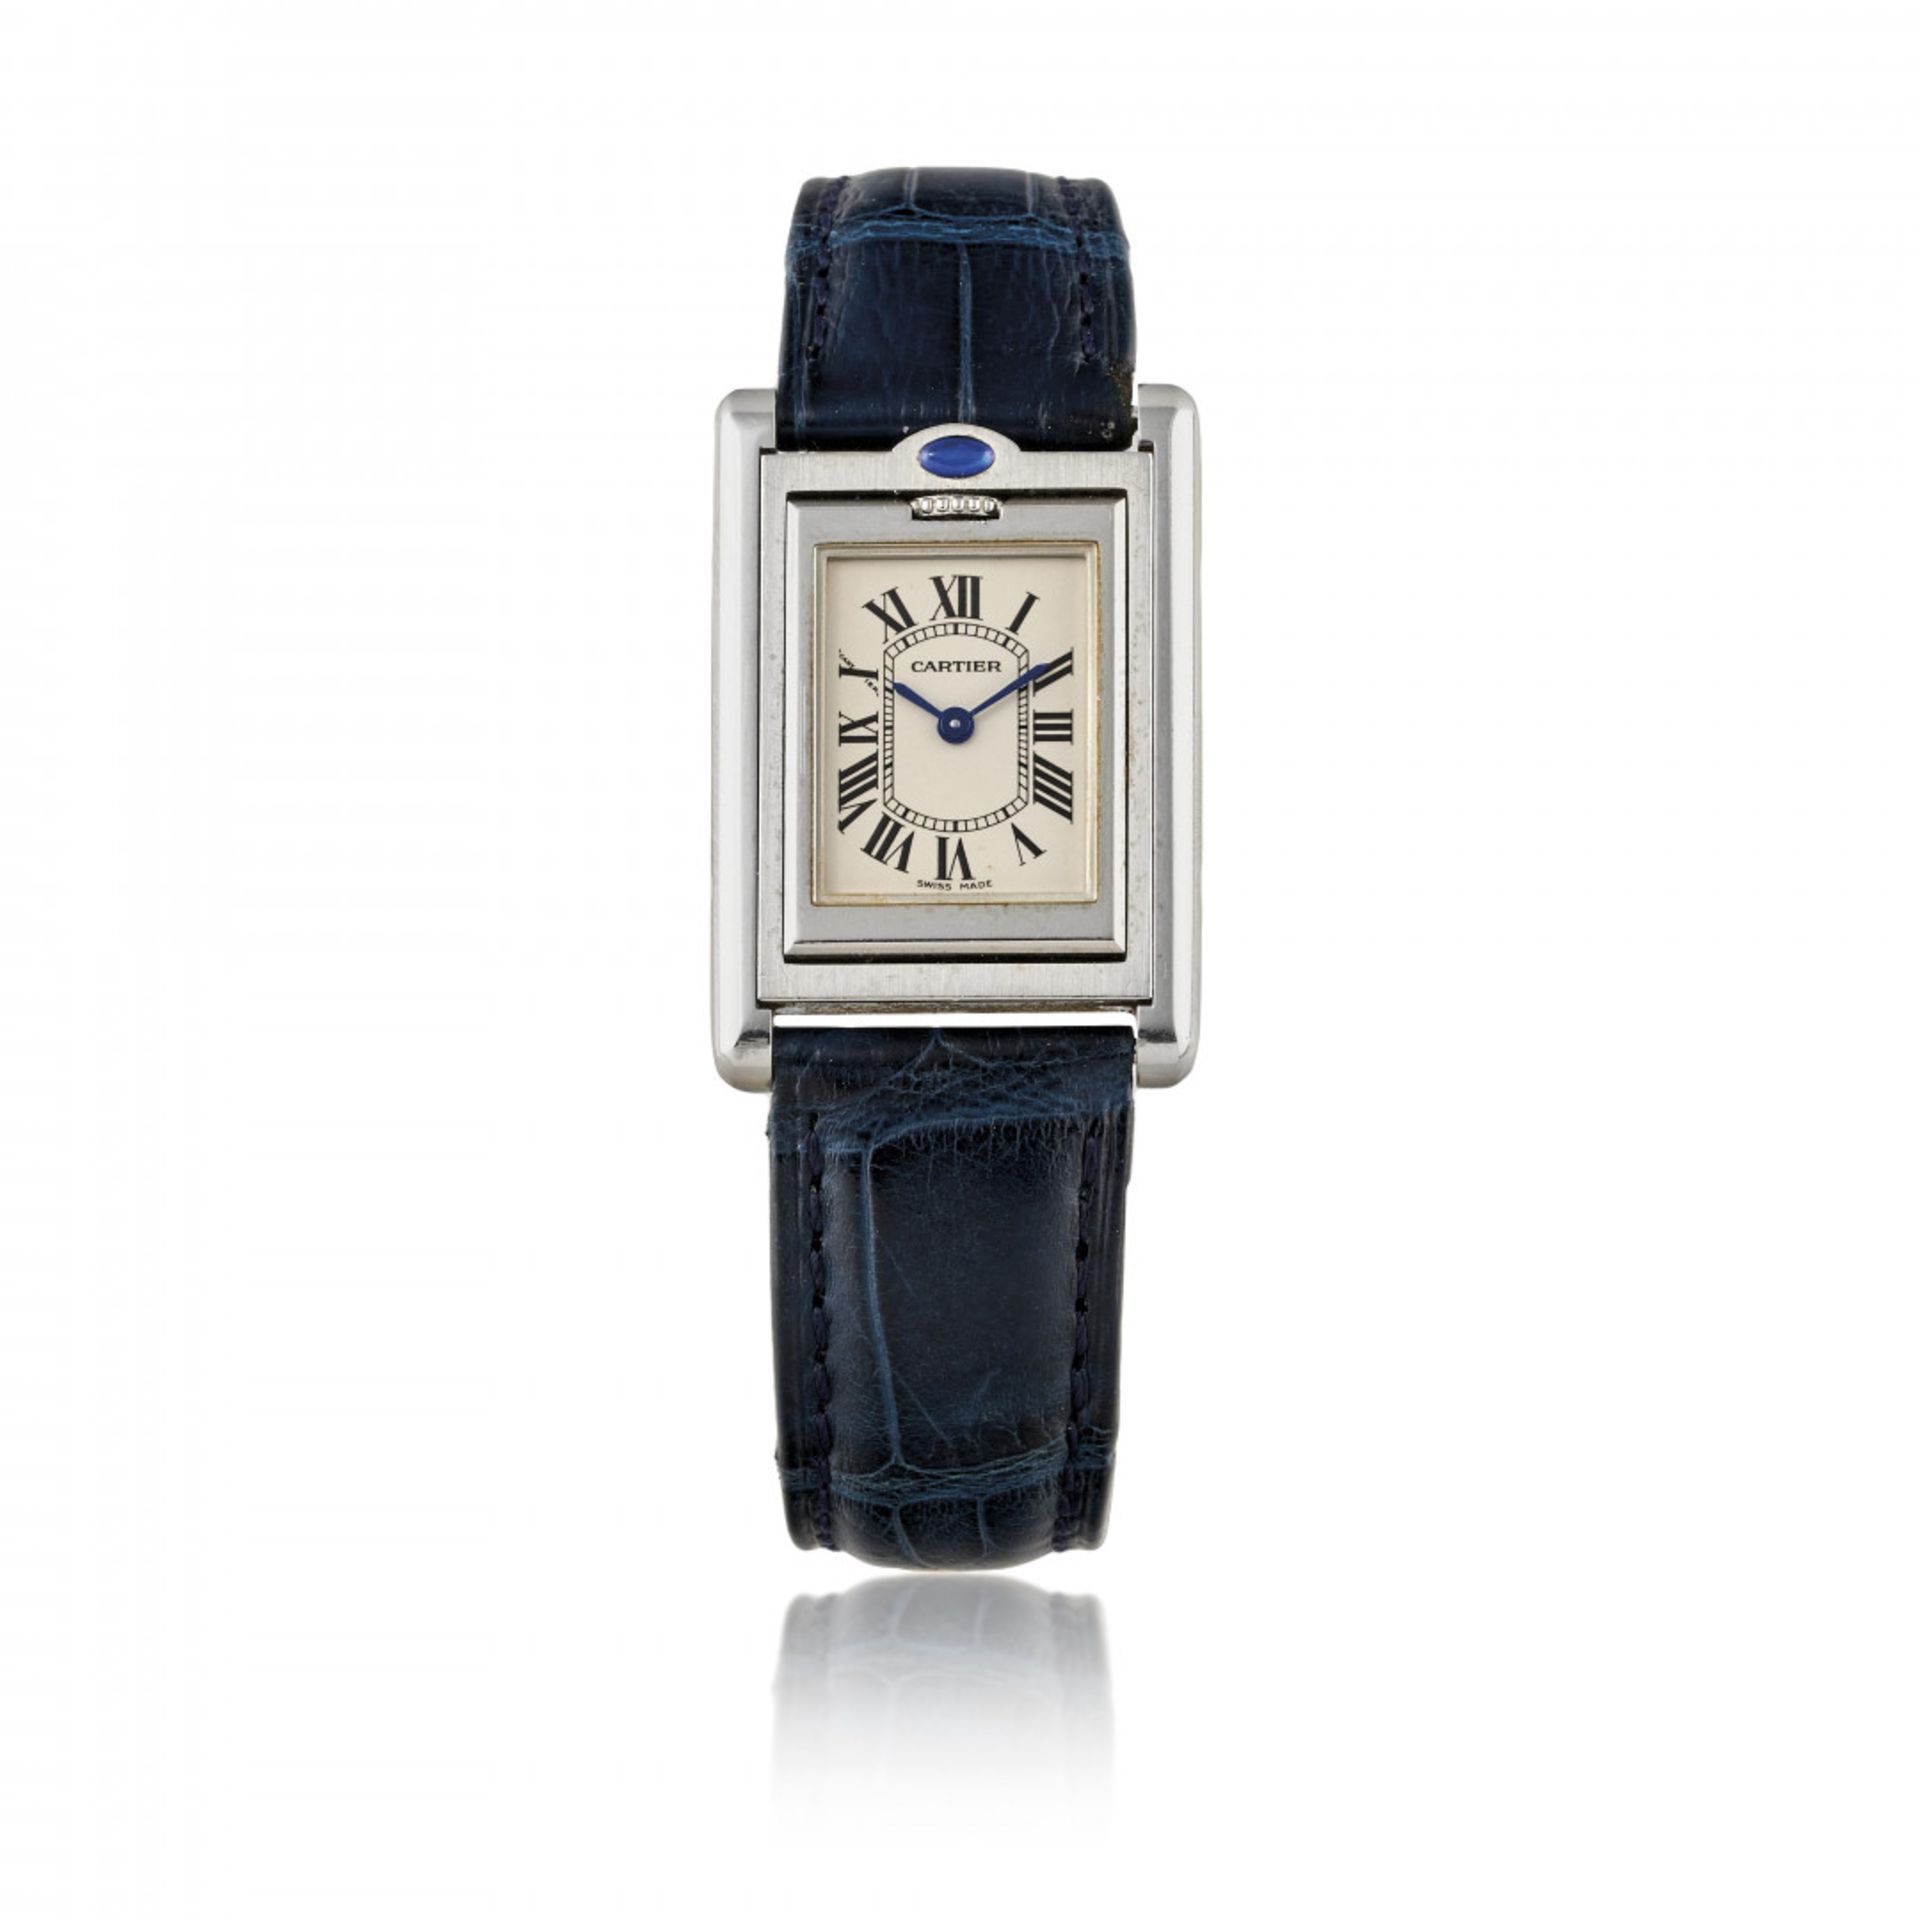 CARTIER TANK BASCULANTE REF. 2386 WITH BOX AND PAPERS, SOLD IN 2001